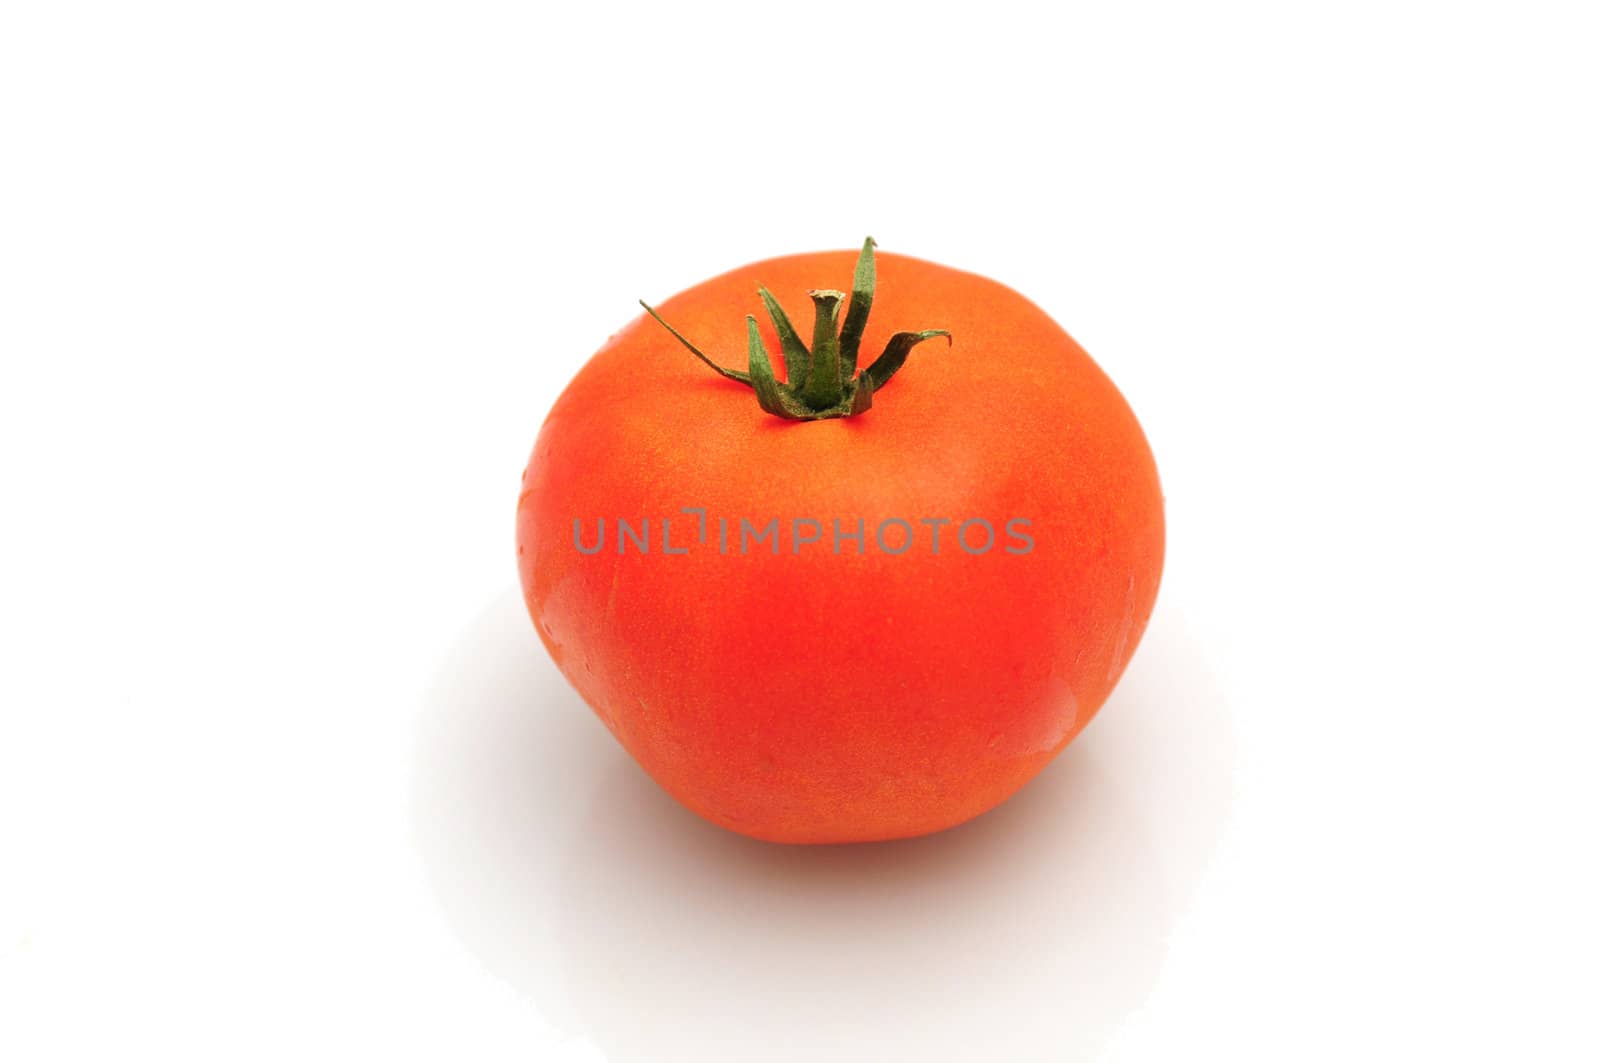 A red tomato, a healthy food choice, isolated on a white background